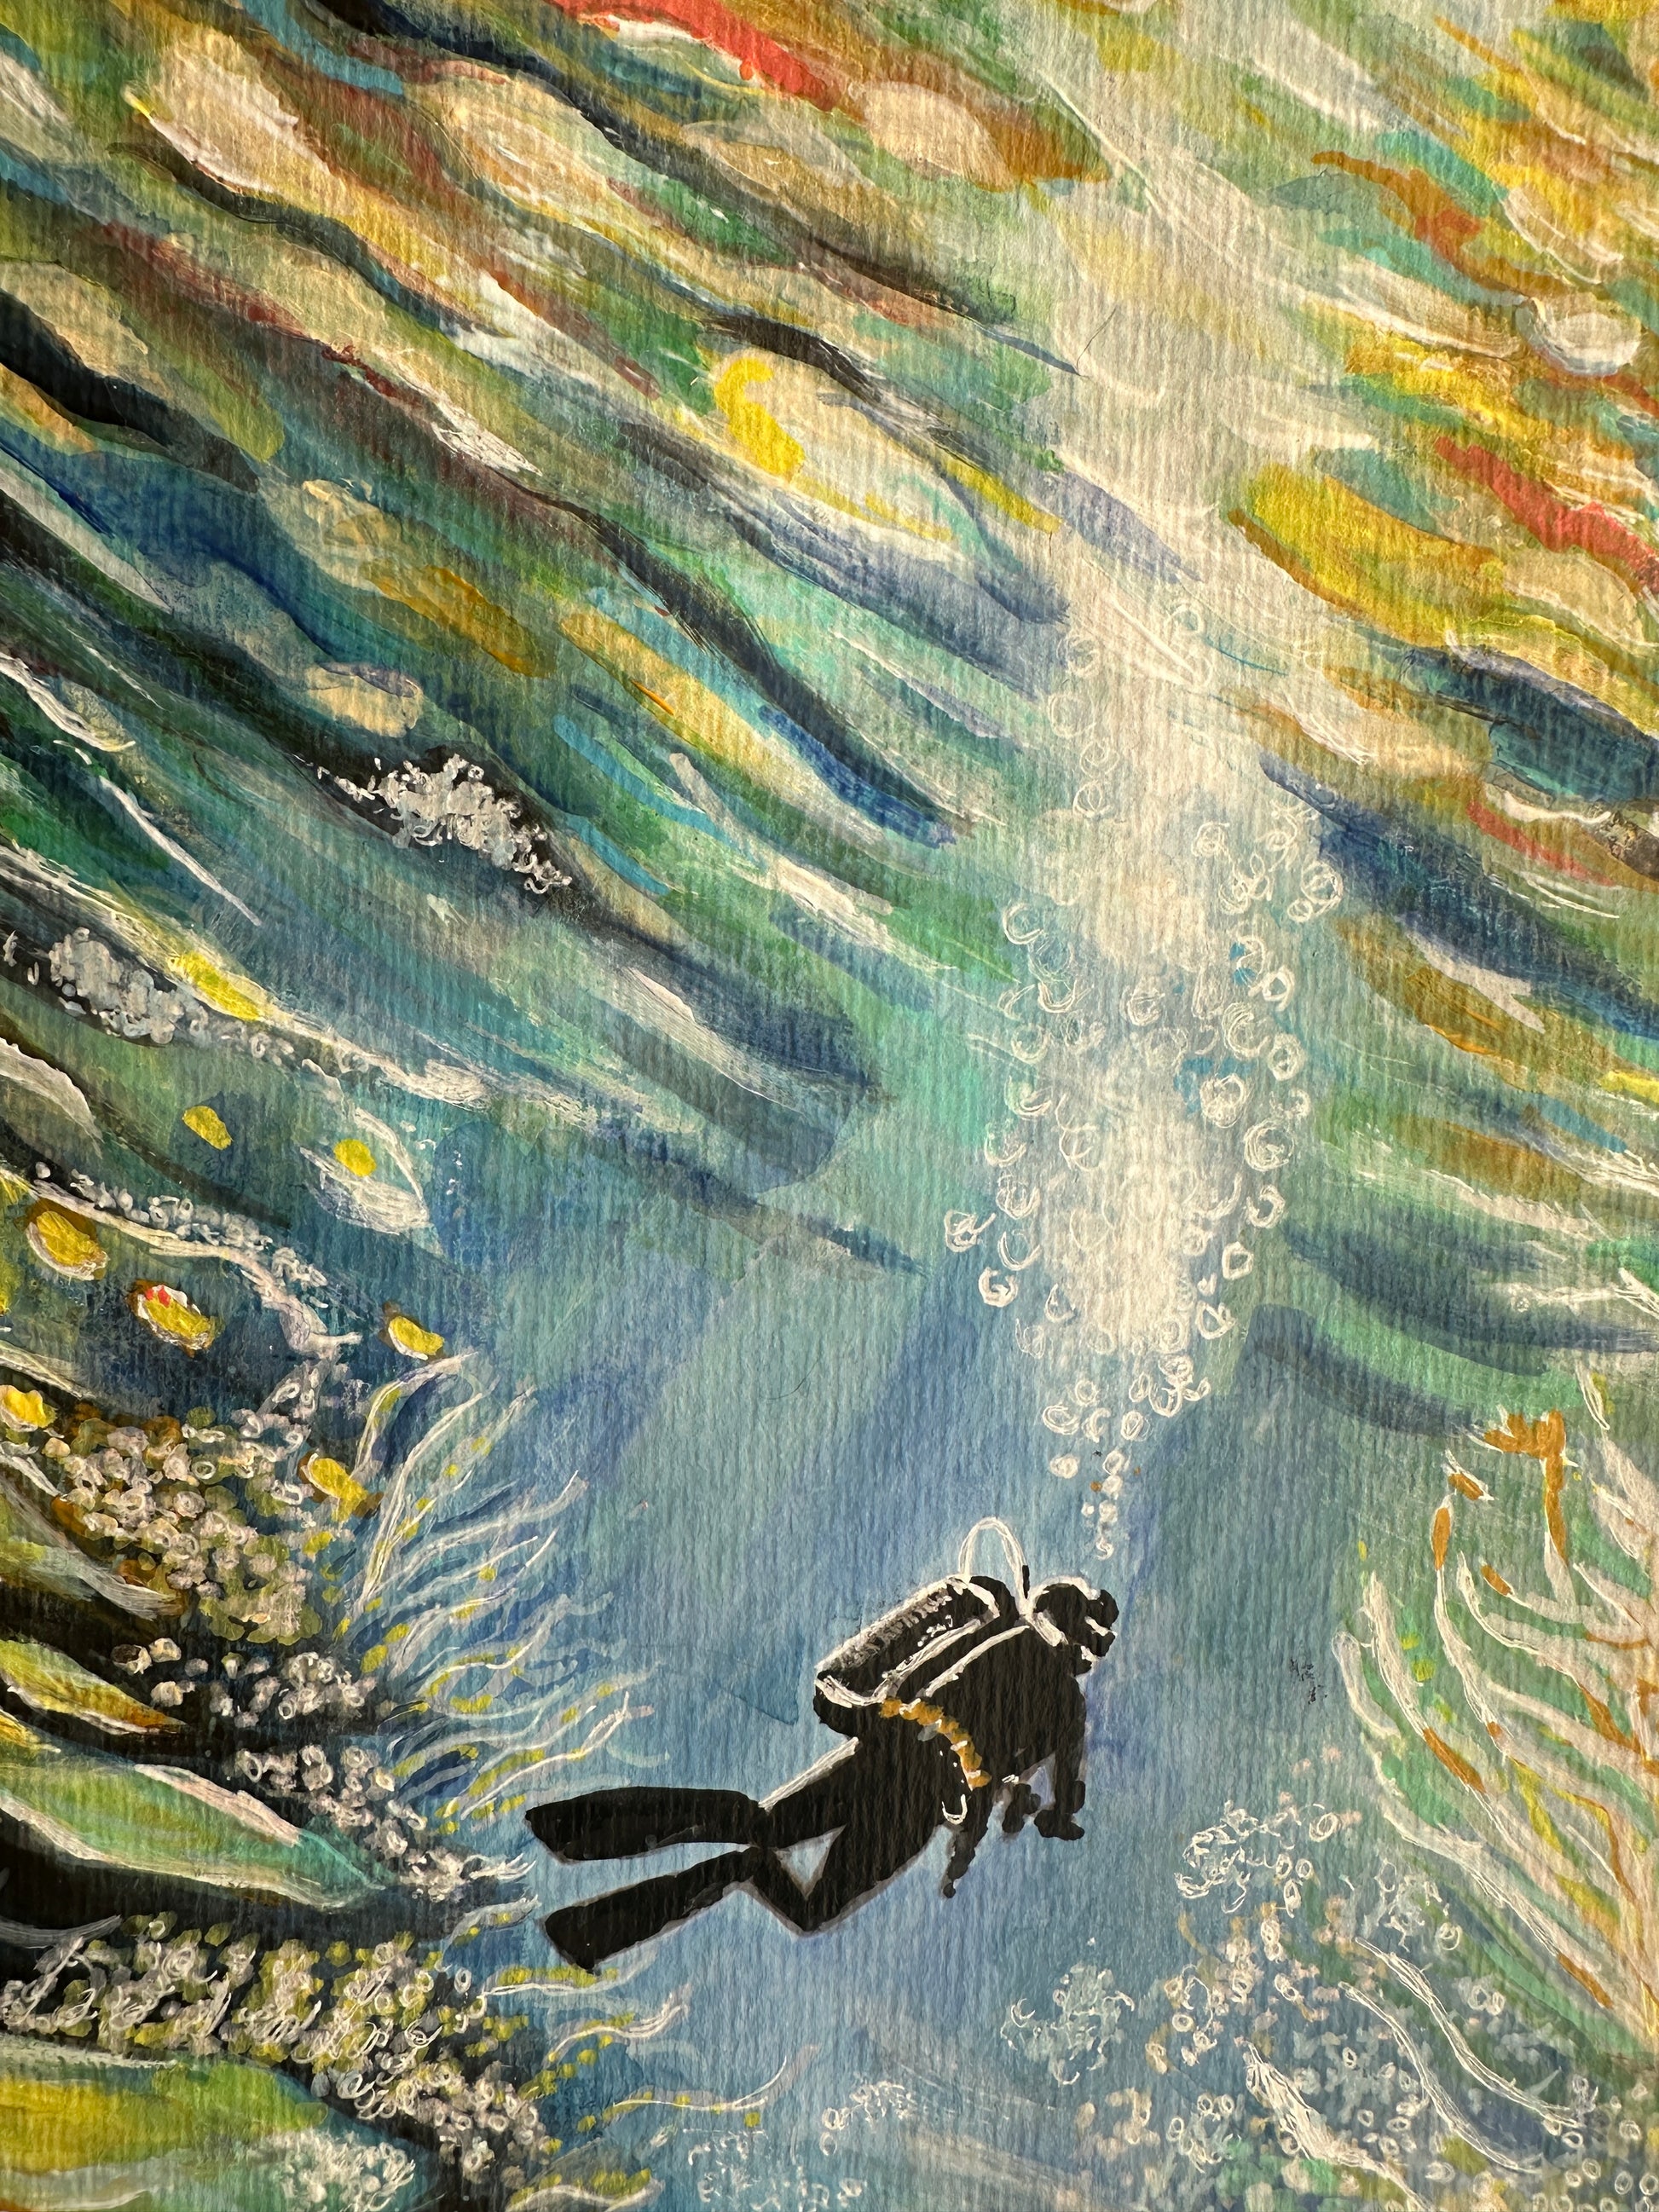 "Diver among the biodiversity of a coral reef, sunlight patterns shimmering above, on aquarelle paper."